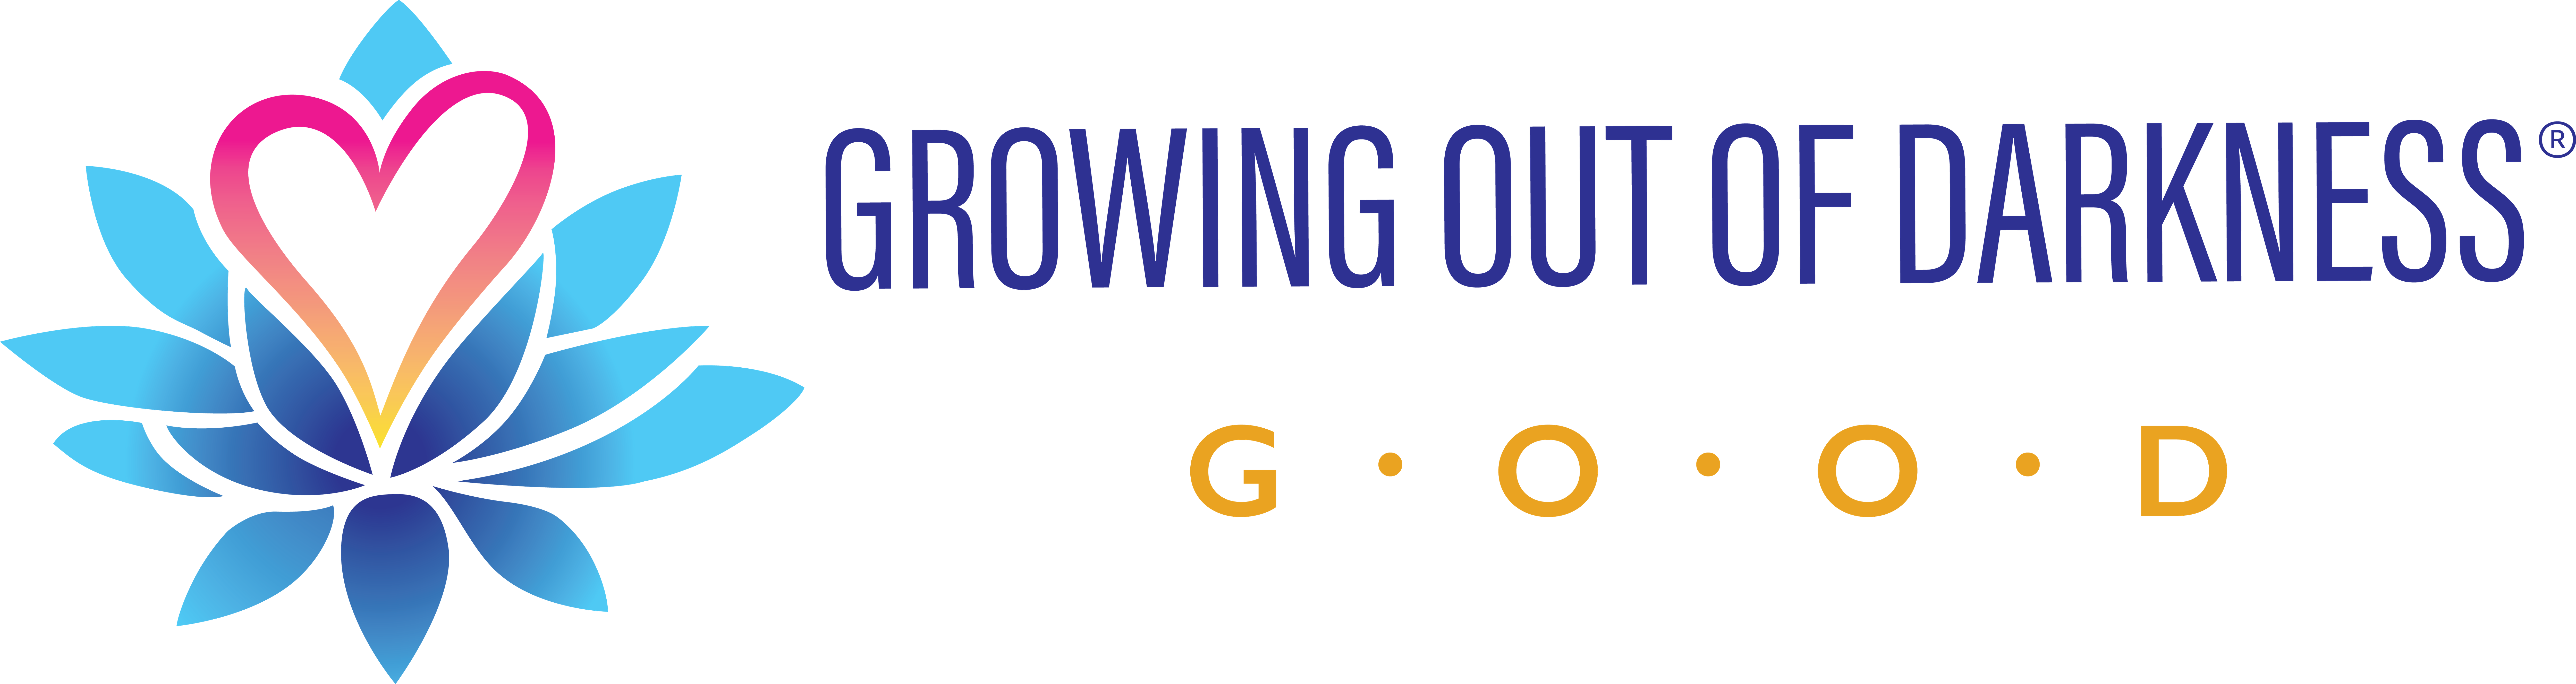 Growing Out Of Darkness logo